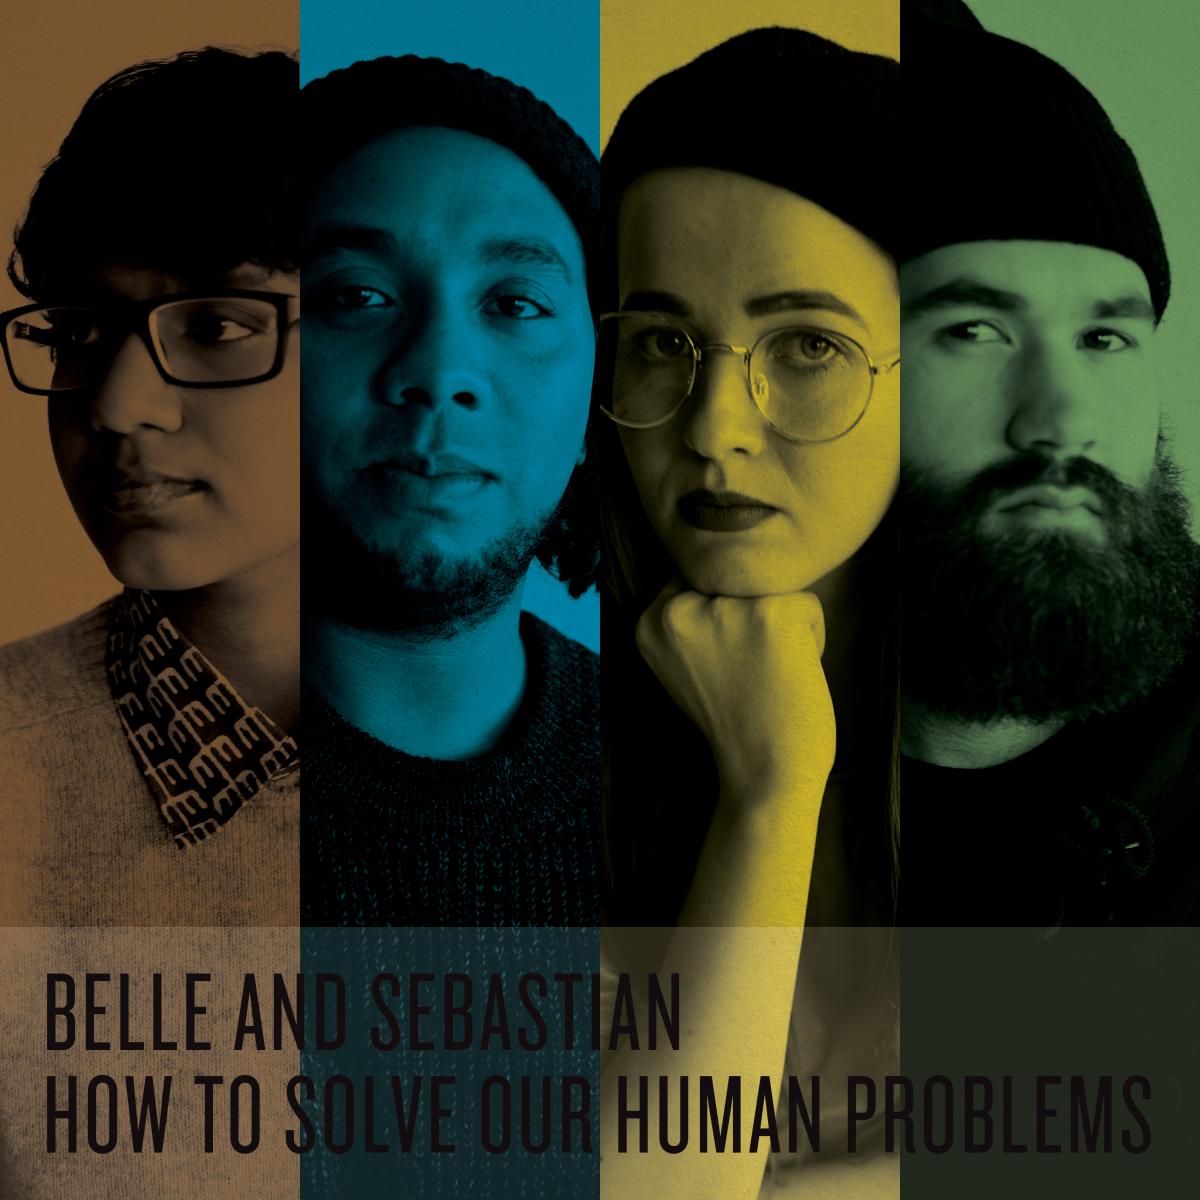 Belle & Sebastian - How to Solve Our Human Problems (Boxed Set, Limited Edition)